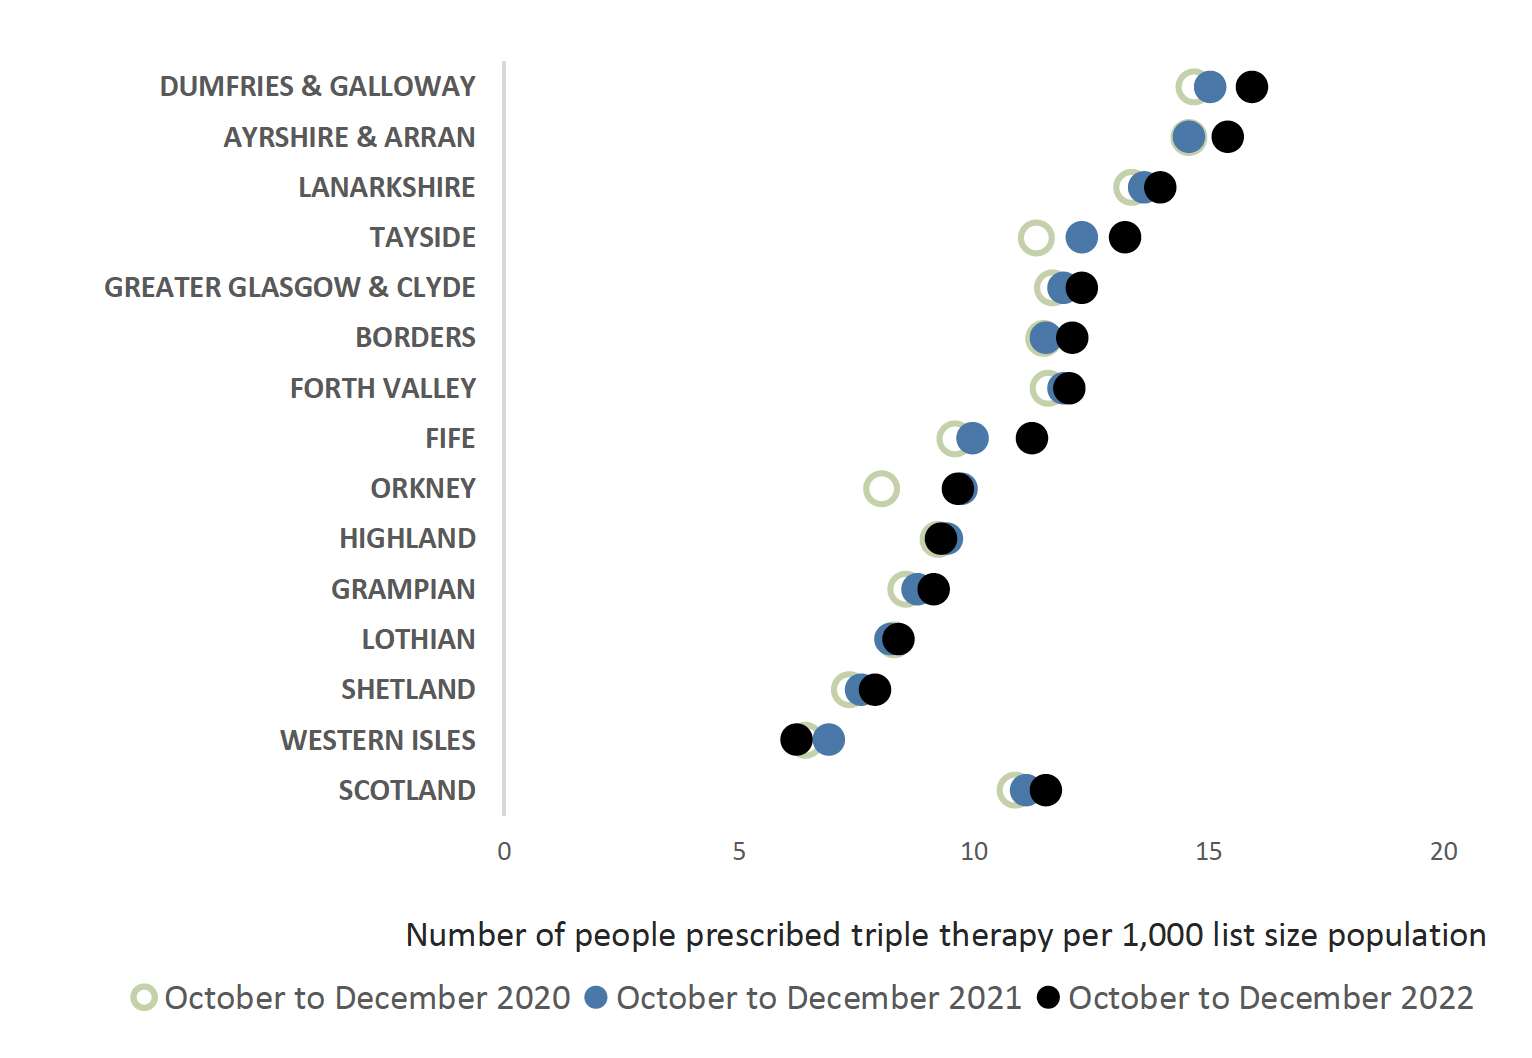 Chart showing variance of people receiving triple therapy across health boards and Scotland from 2020 to 2022. Overall Scotland trend is increasing